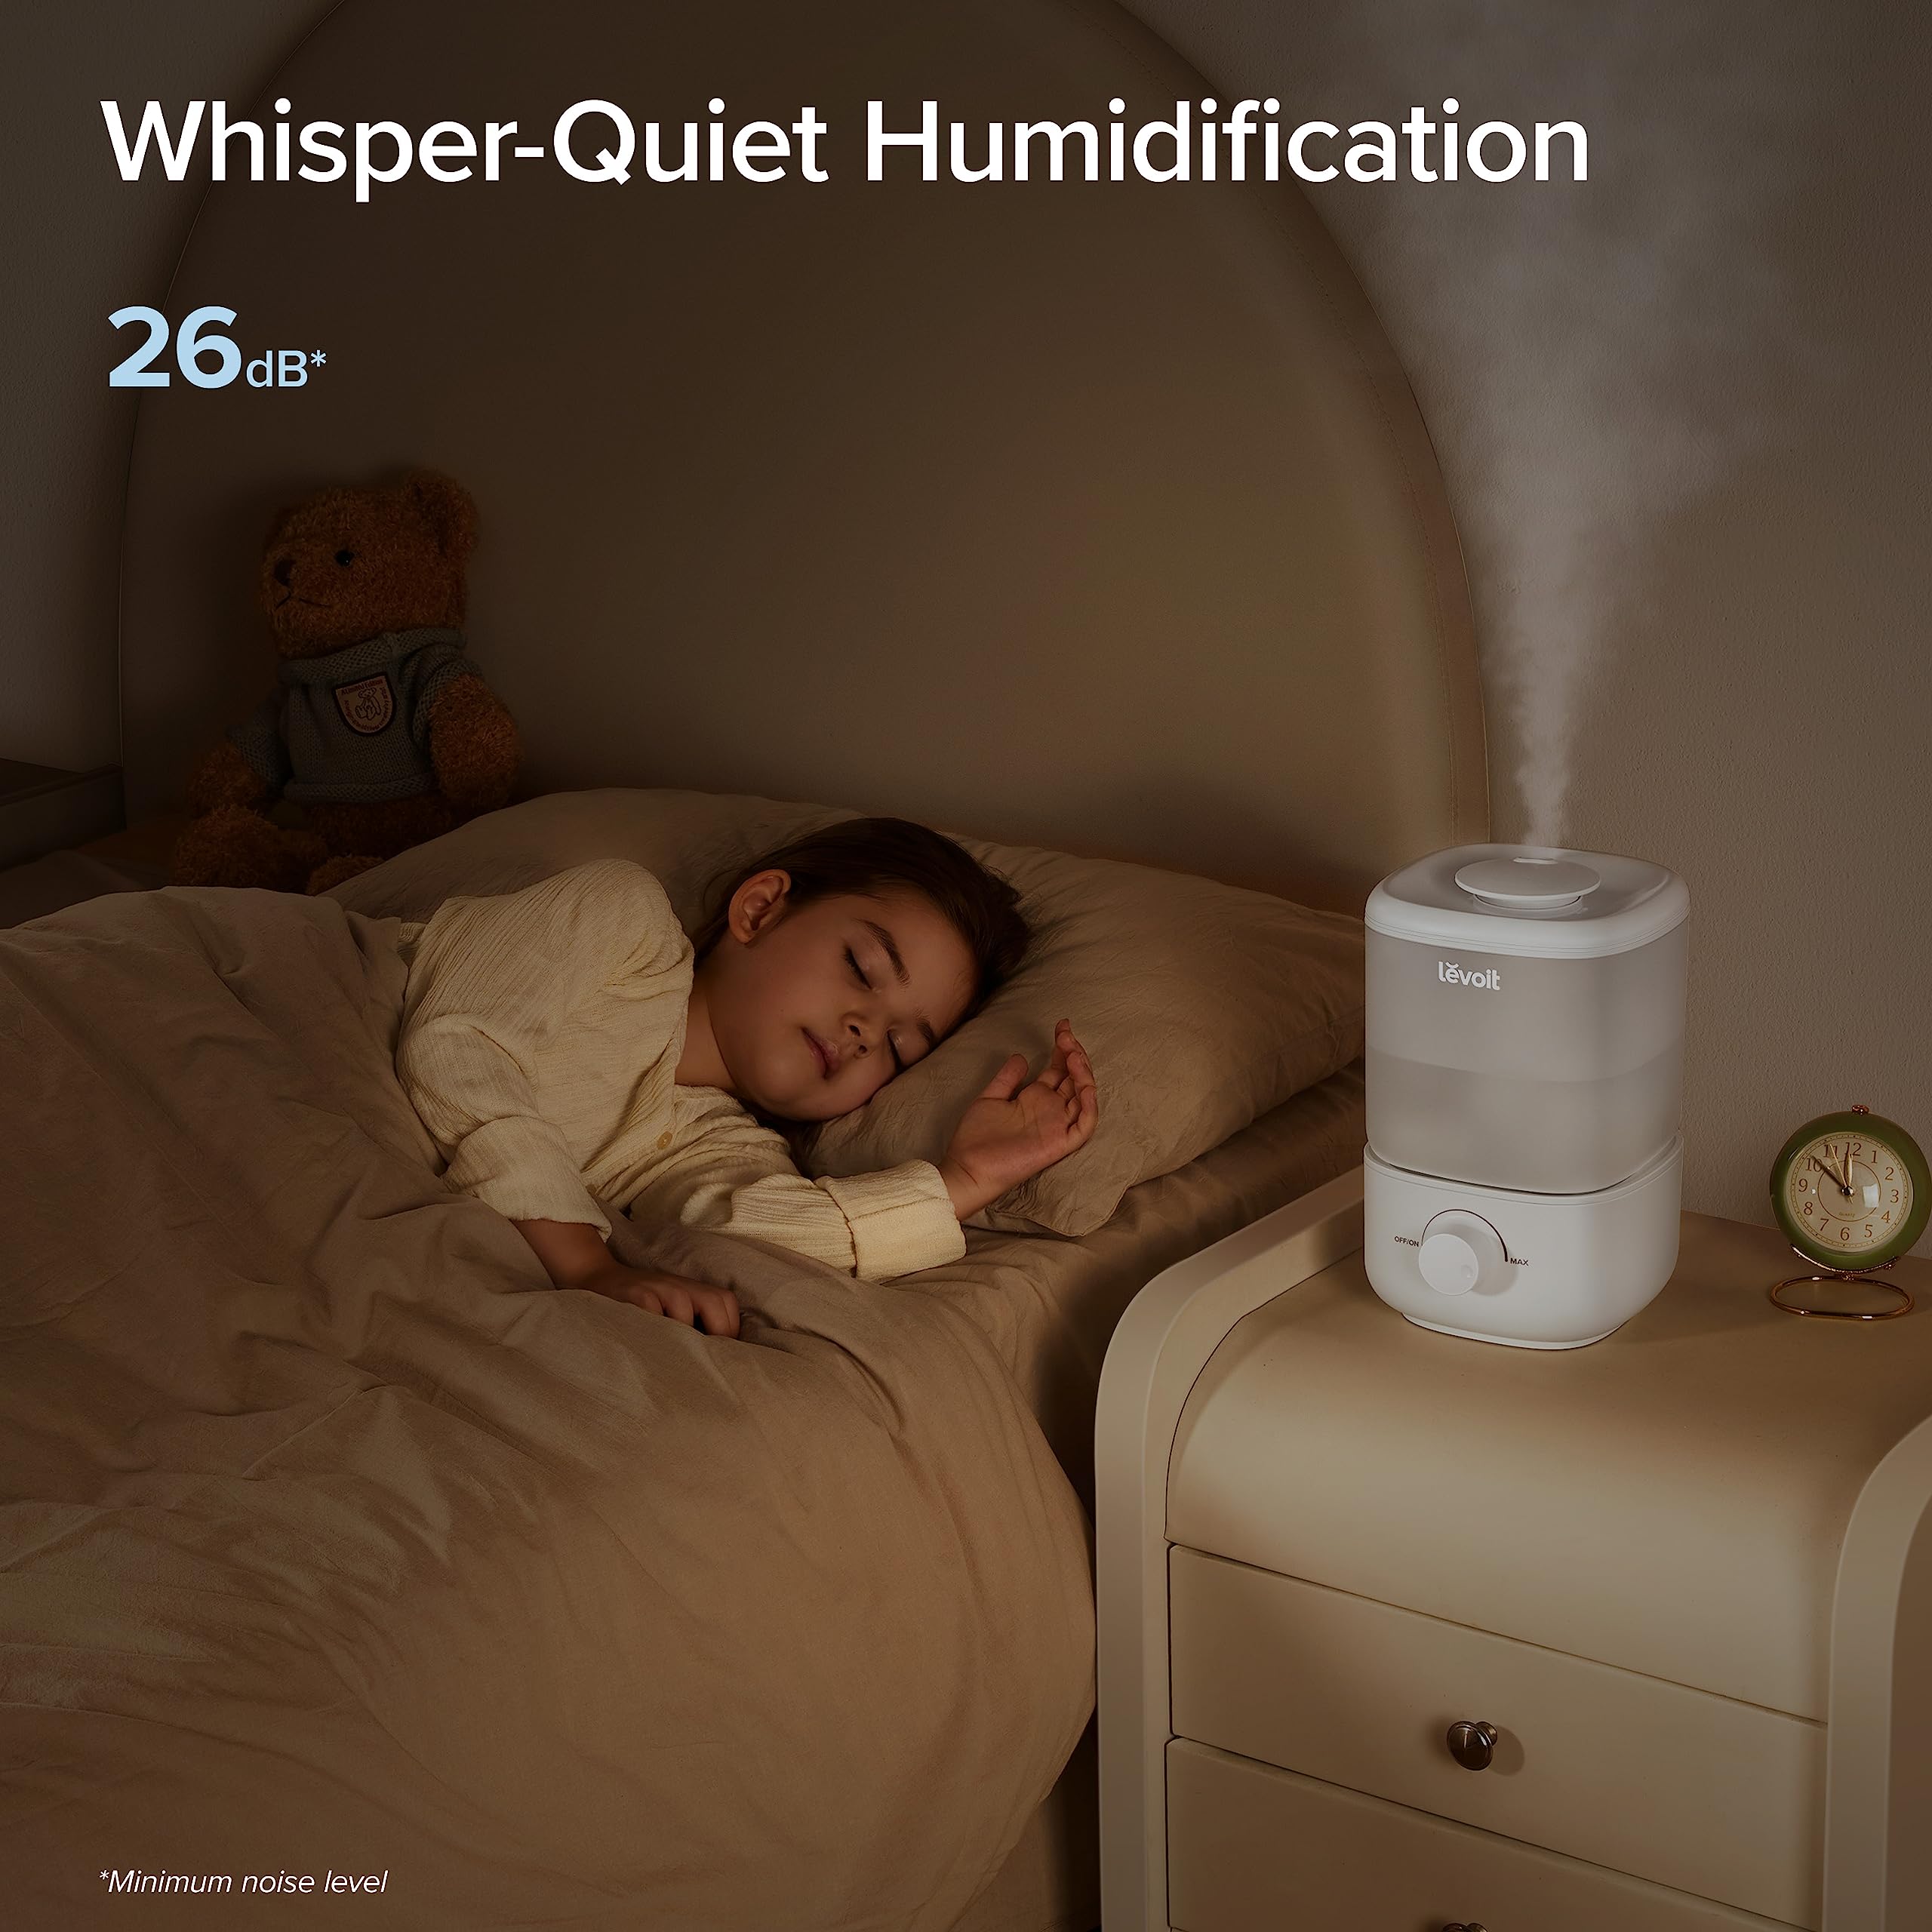 LEVOIT Top Fill Humidifiers for Bedroom (2.5L Large Tank), Cool Mist Ultrasonic Air Humidifier for Home Baby Nursery & Plants, Auto Shut-off and BPA-Free for Safety, Quiet, Knob Control, 360° Nozzle